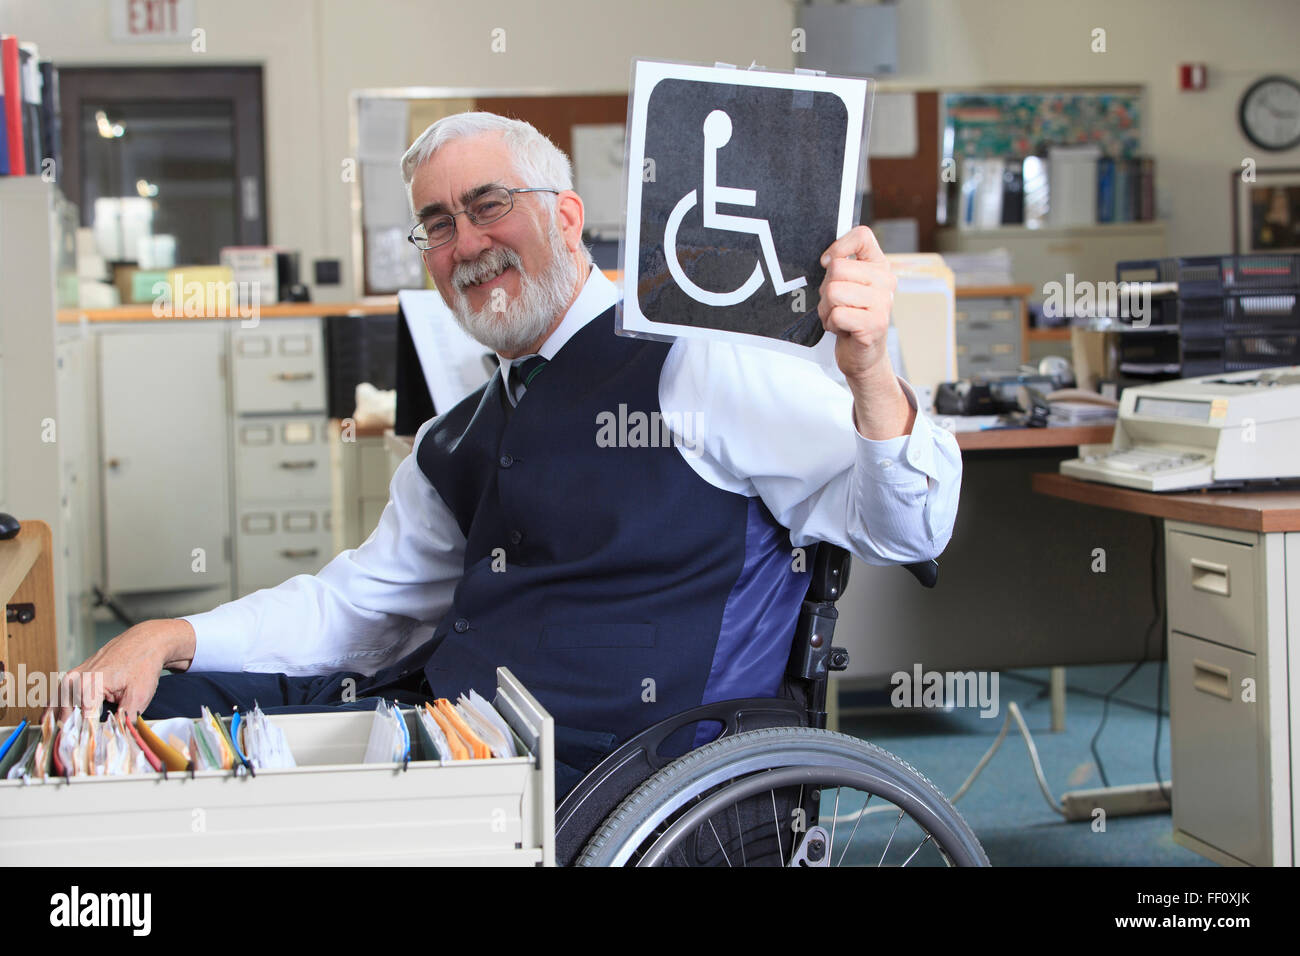 Caucasian businessman holding handicapped sign in office Stock Photo